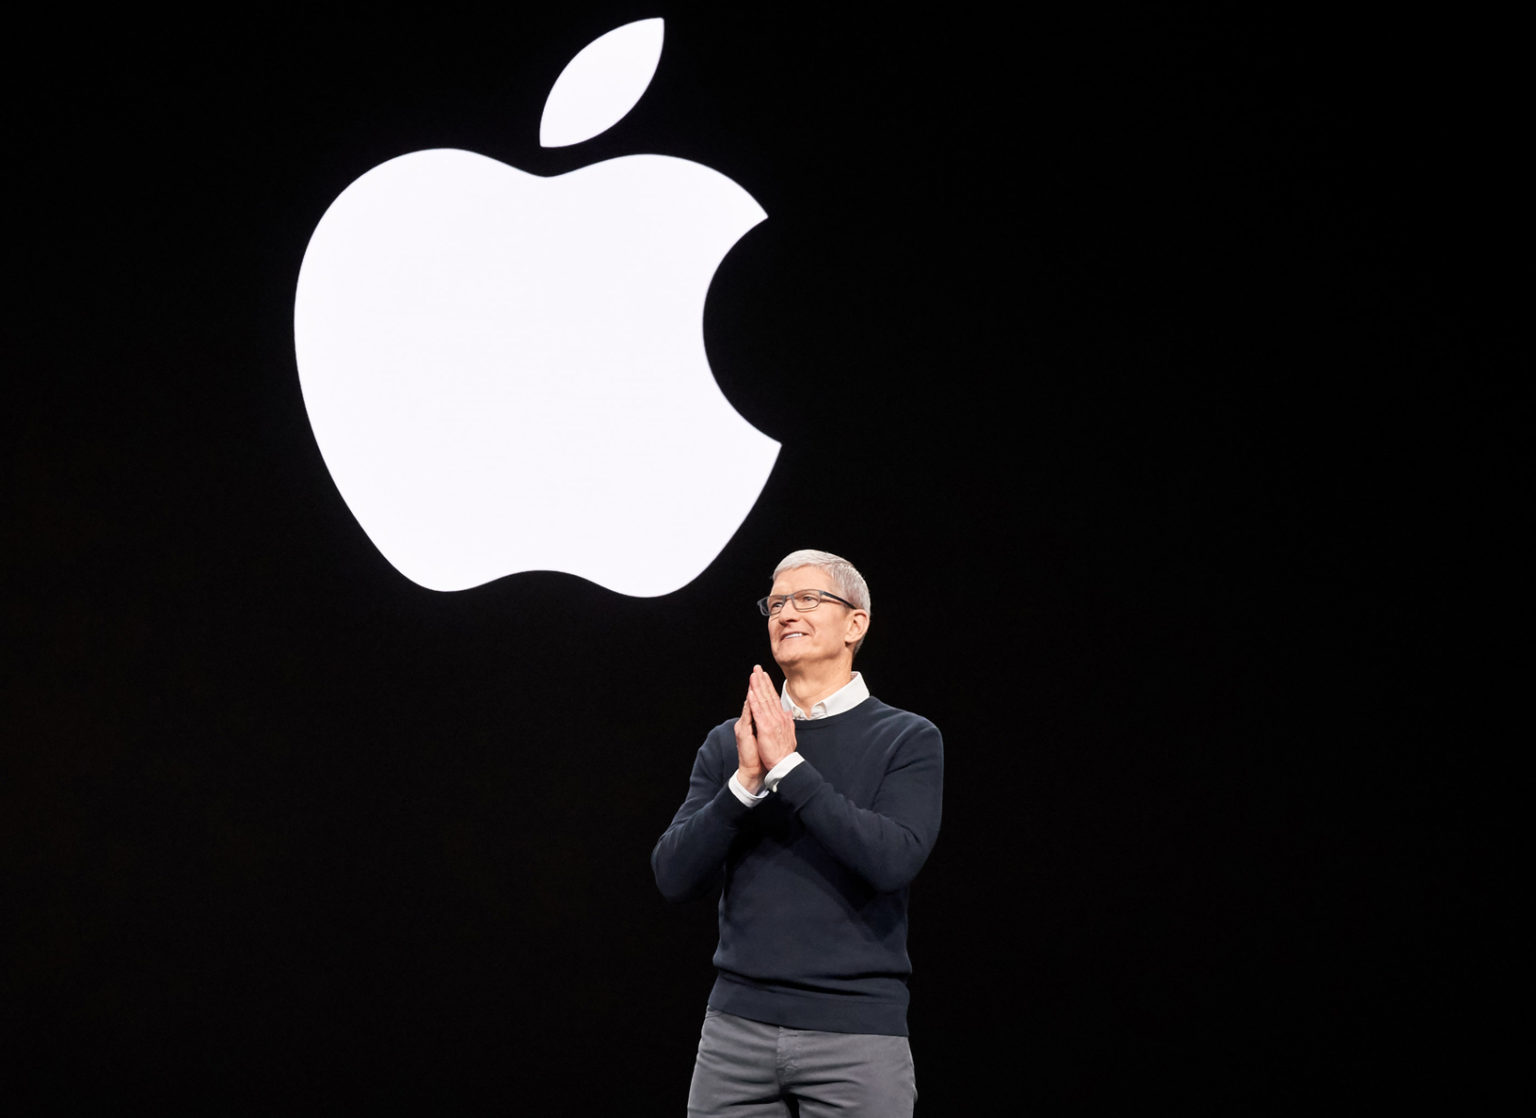 Tim Cook is keeping quiet about Apple TV+ subscriber numbers for now.